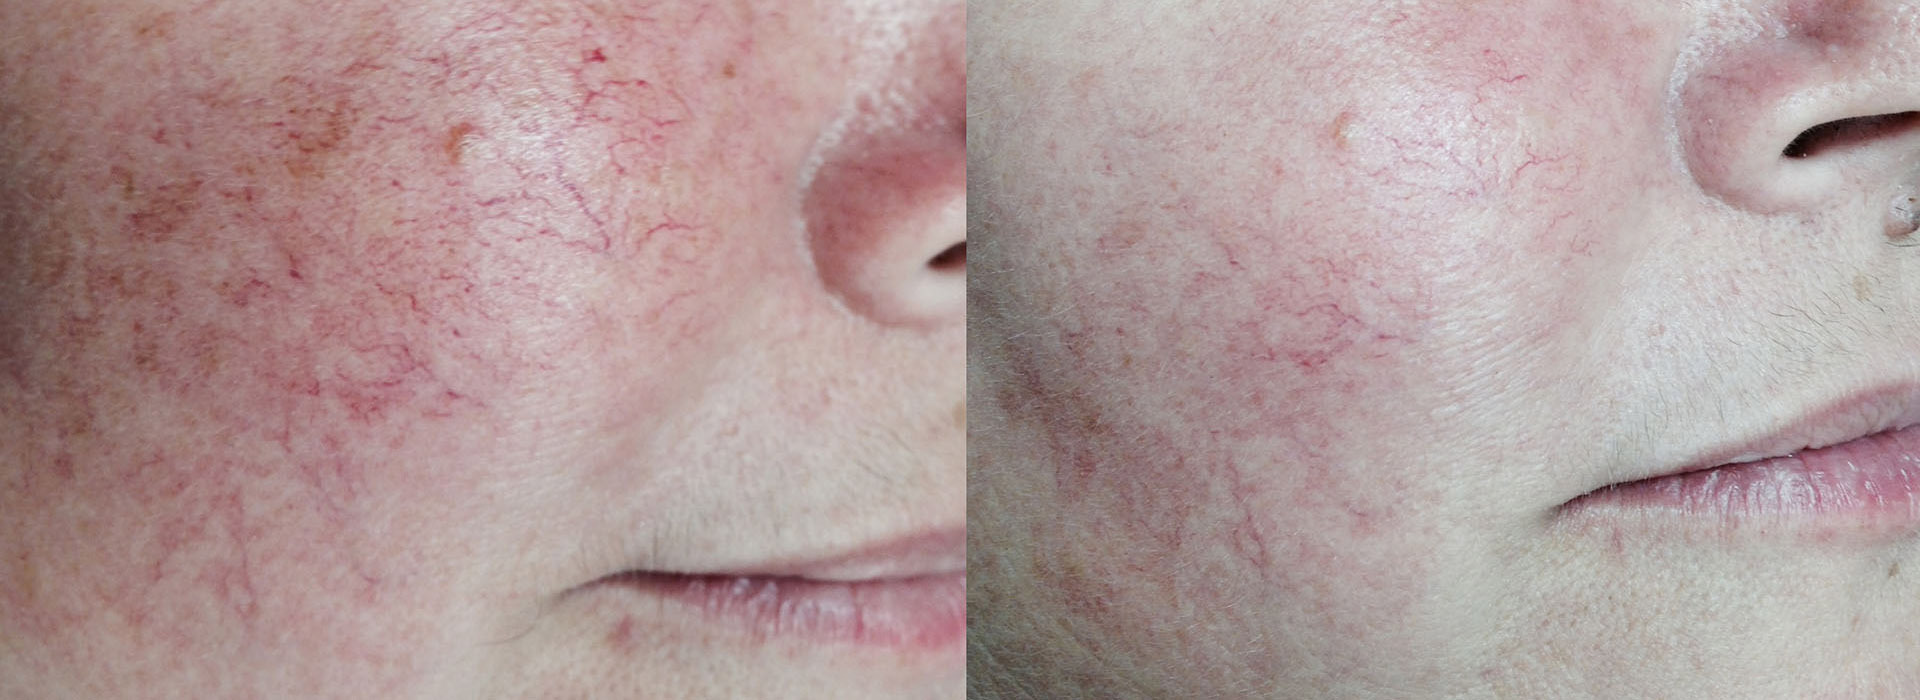 Vascular lesions skin treatment before and after results image